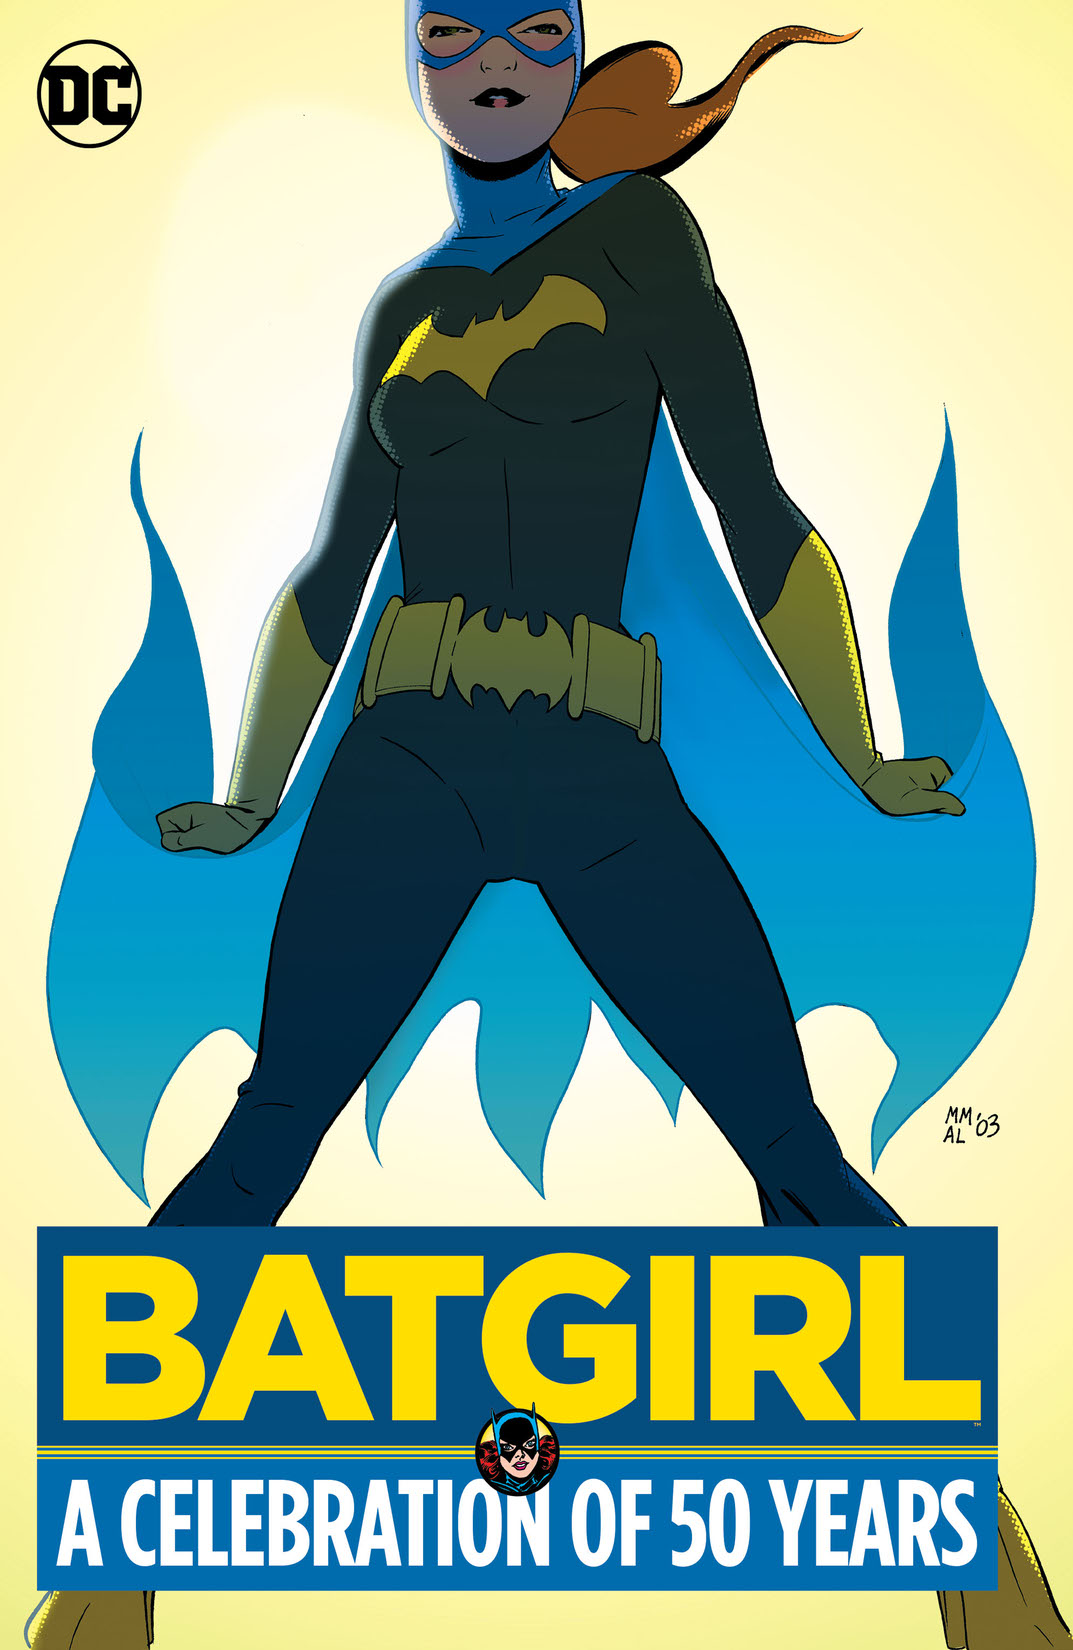 Batgirl: A Celebration of 50 Years preview images